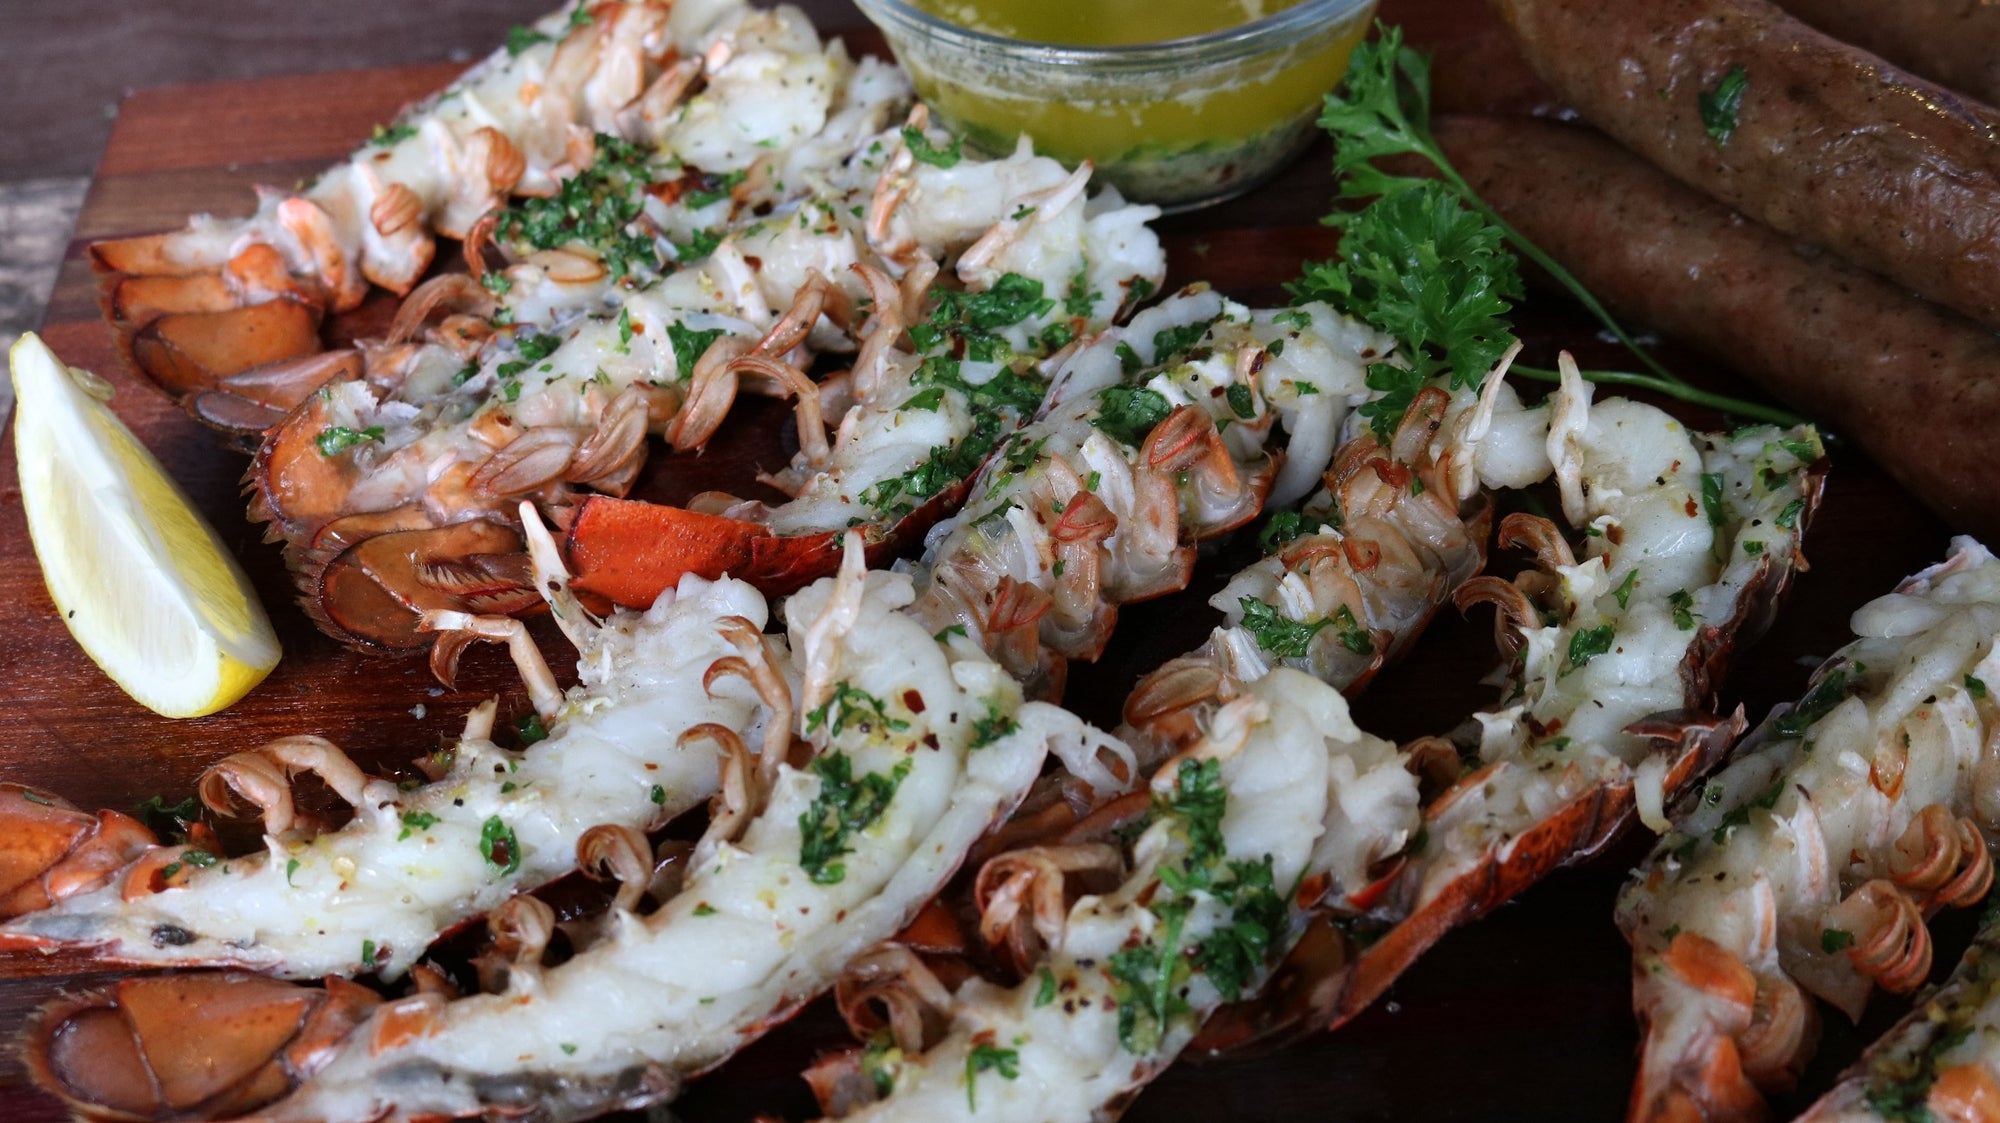 Grilled Lobster Tails with Garlic & Red Pepper Butter Sauce